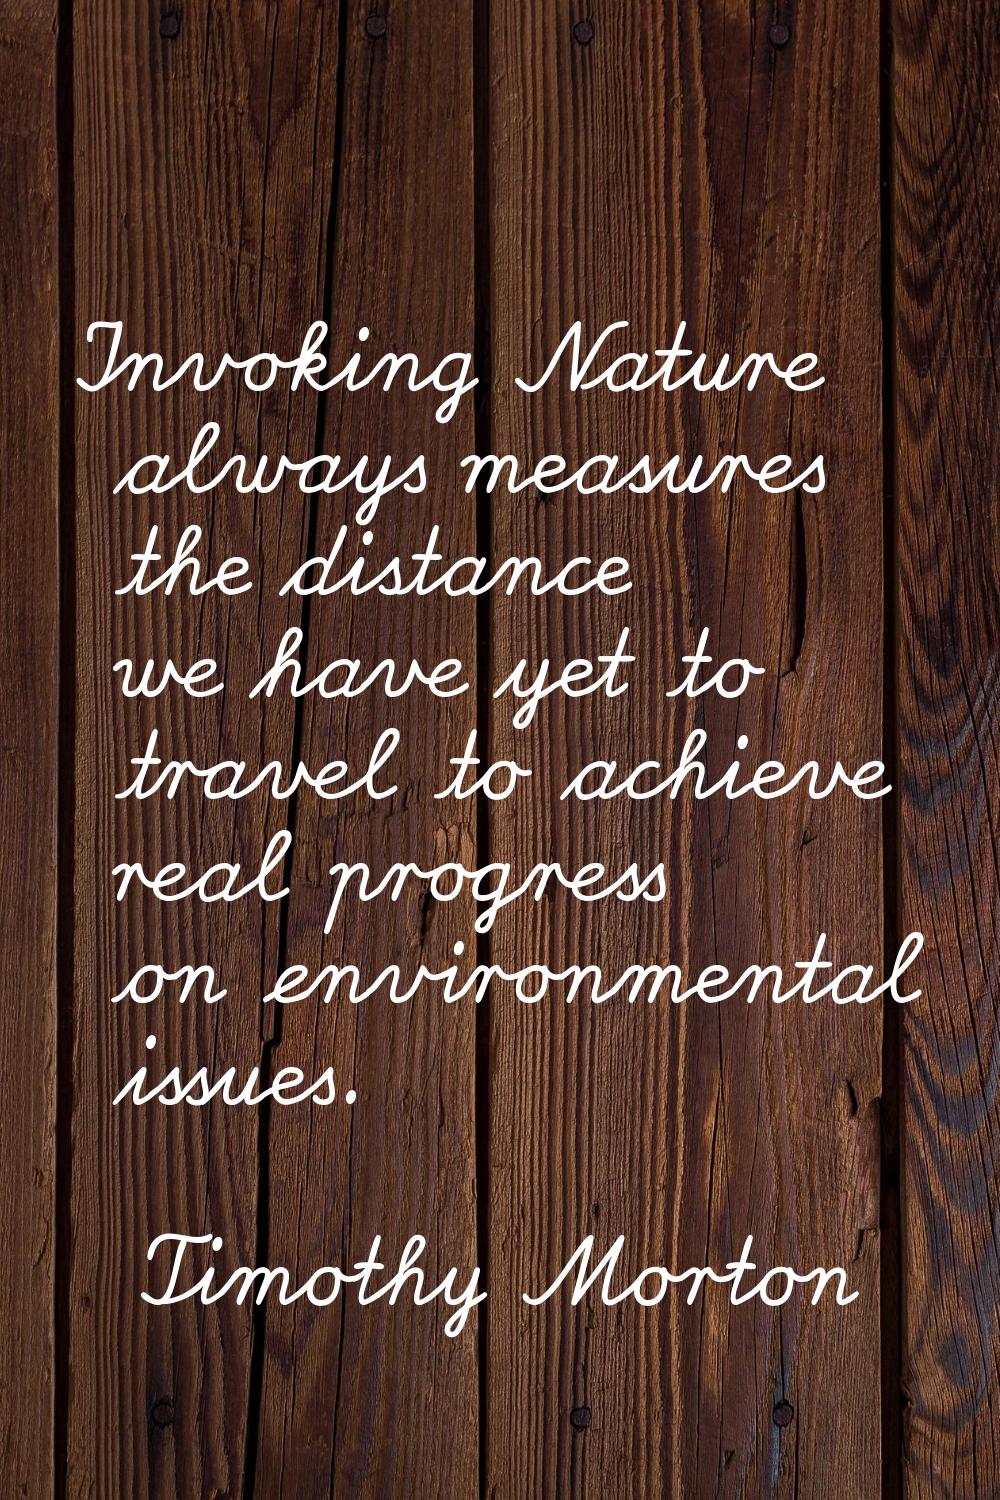 Invoking Nature always measures the distance we have yet to travel to achieve real progress on envi